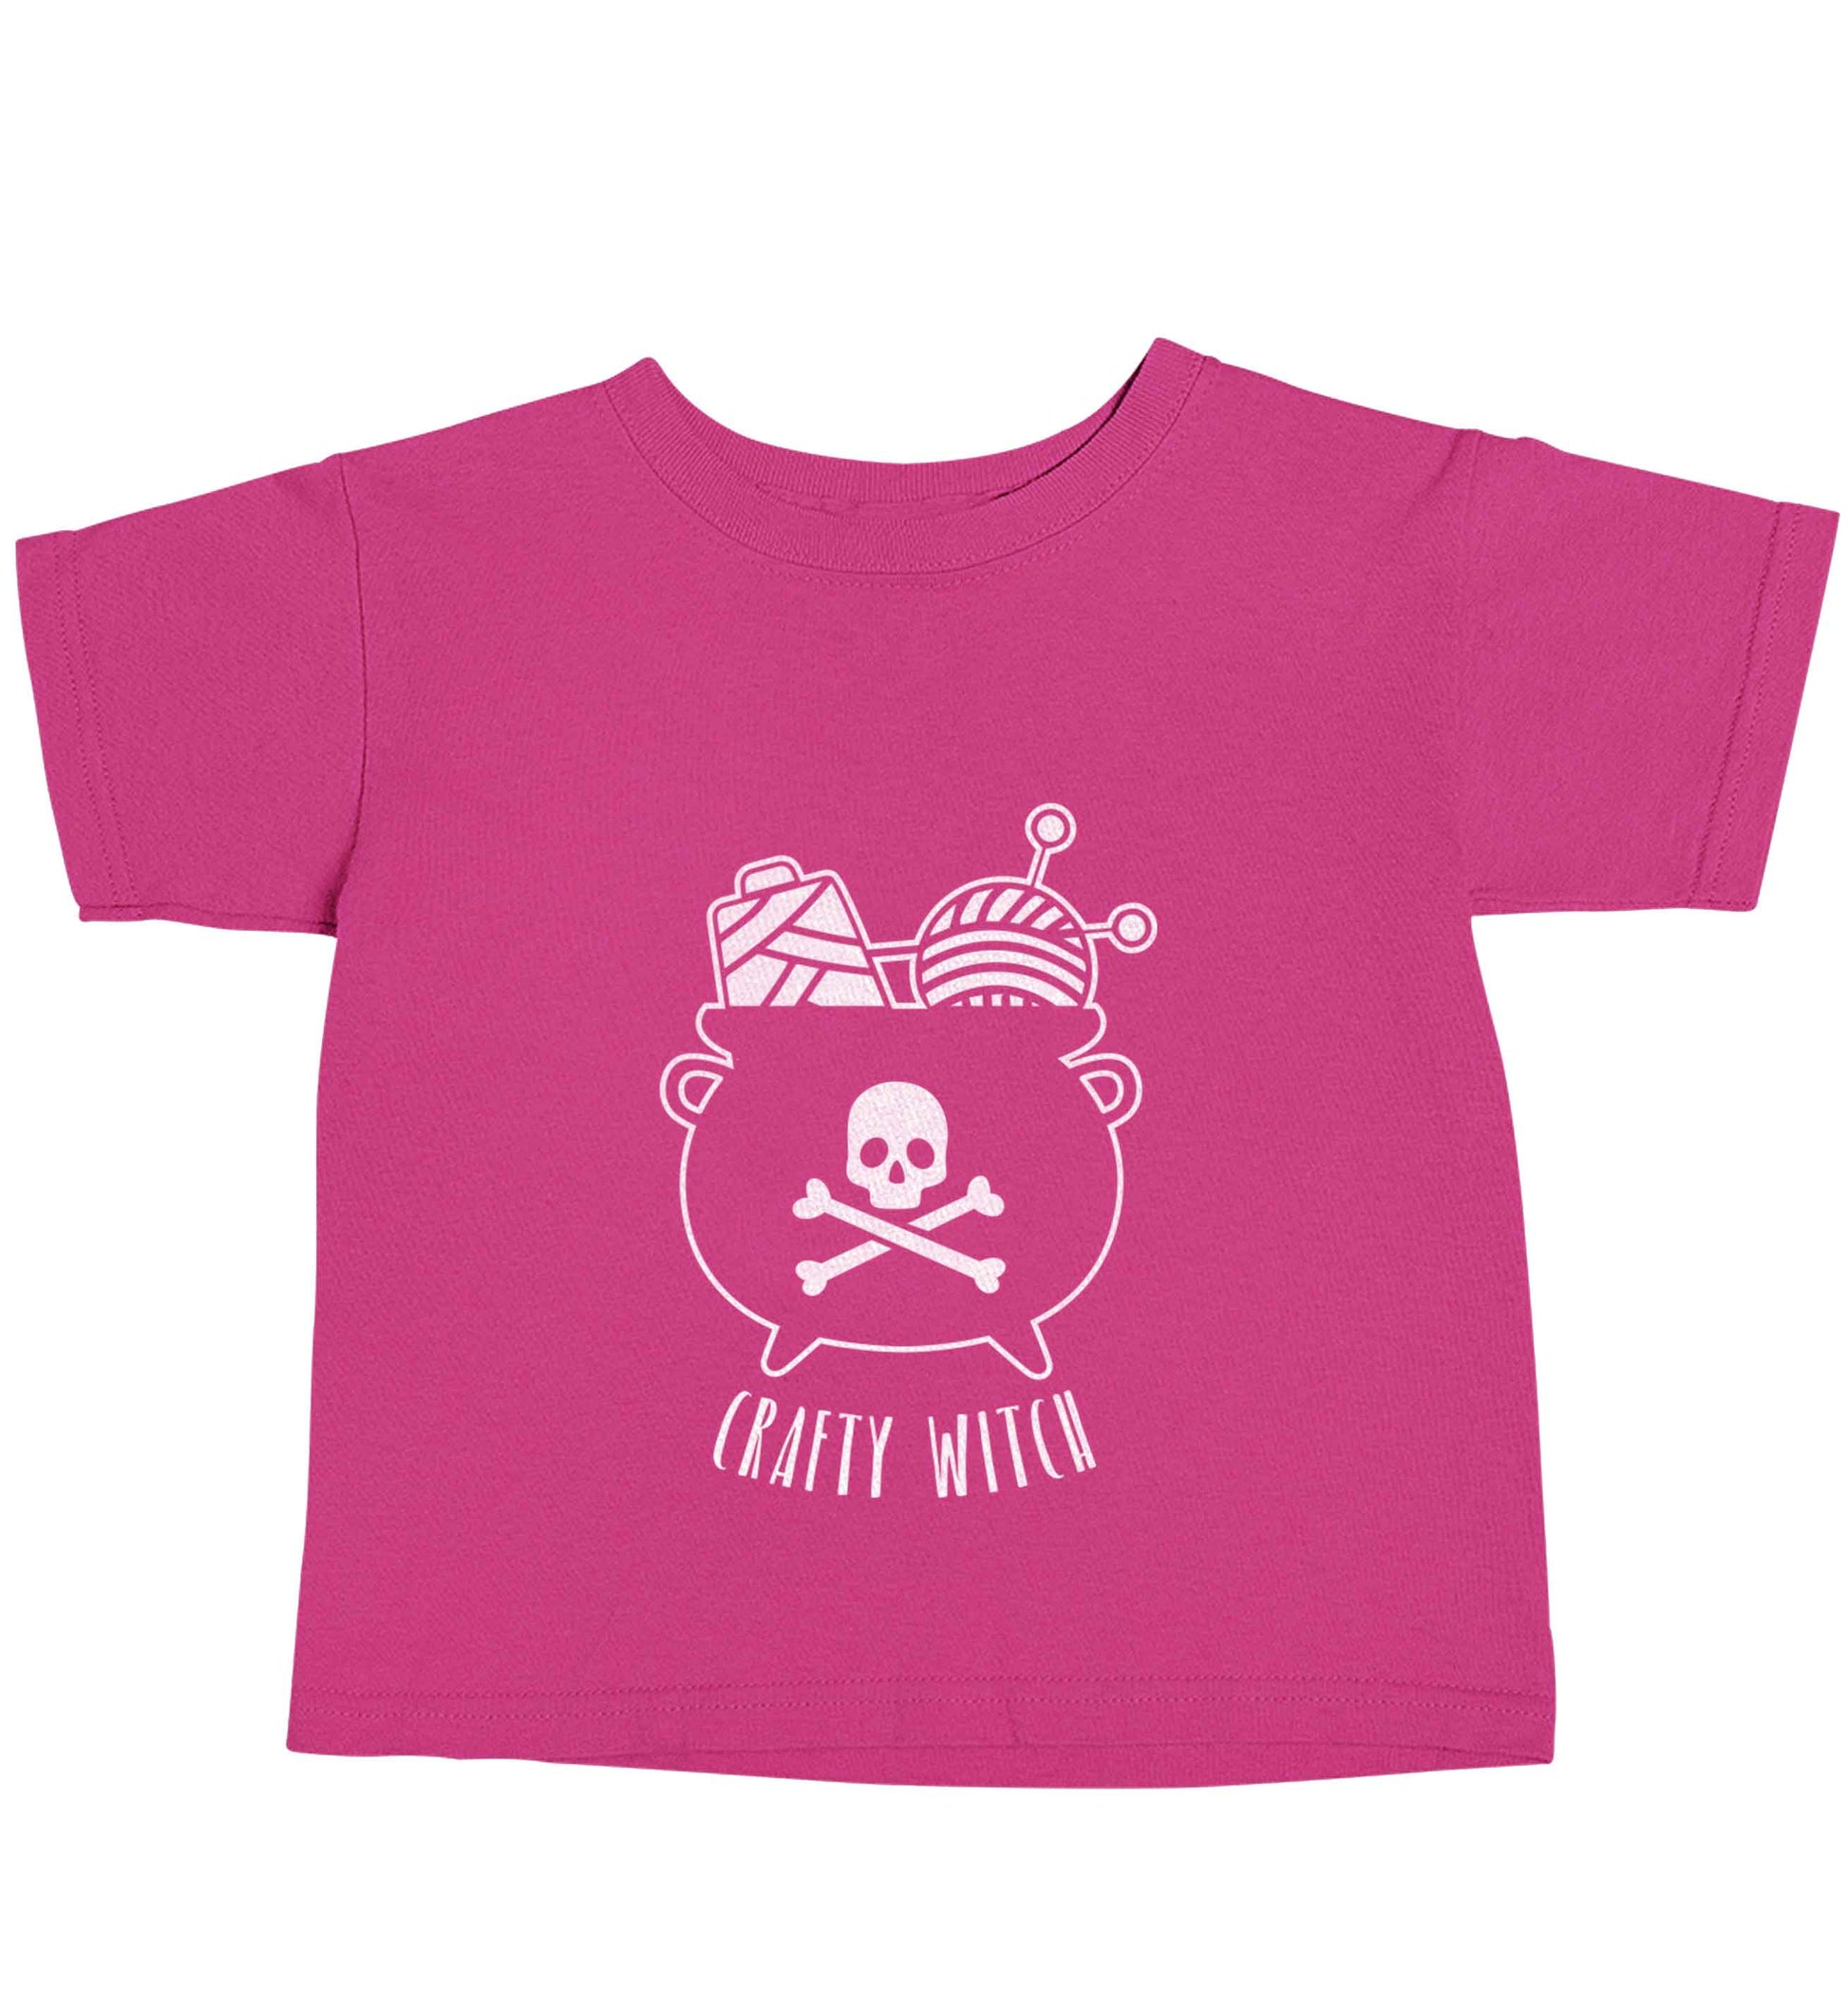 Crafty witch pink baby toddler Tshirt 2 Years